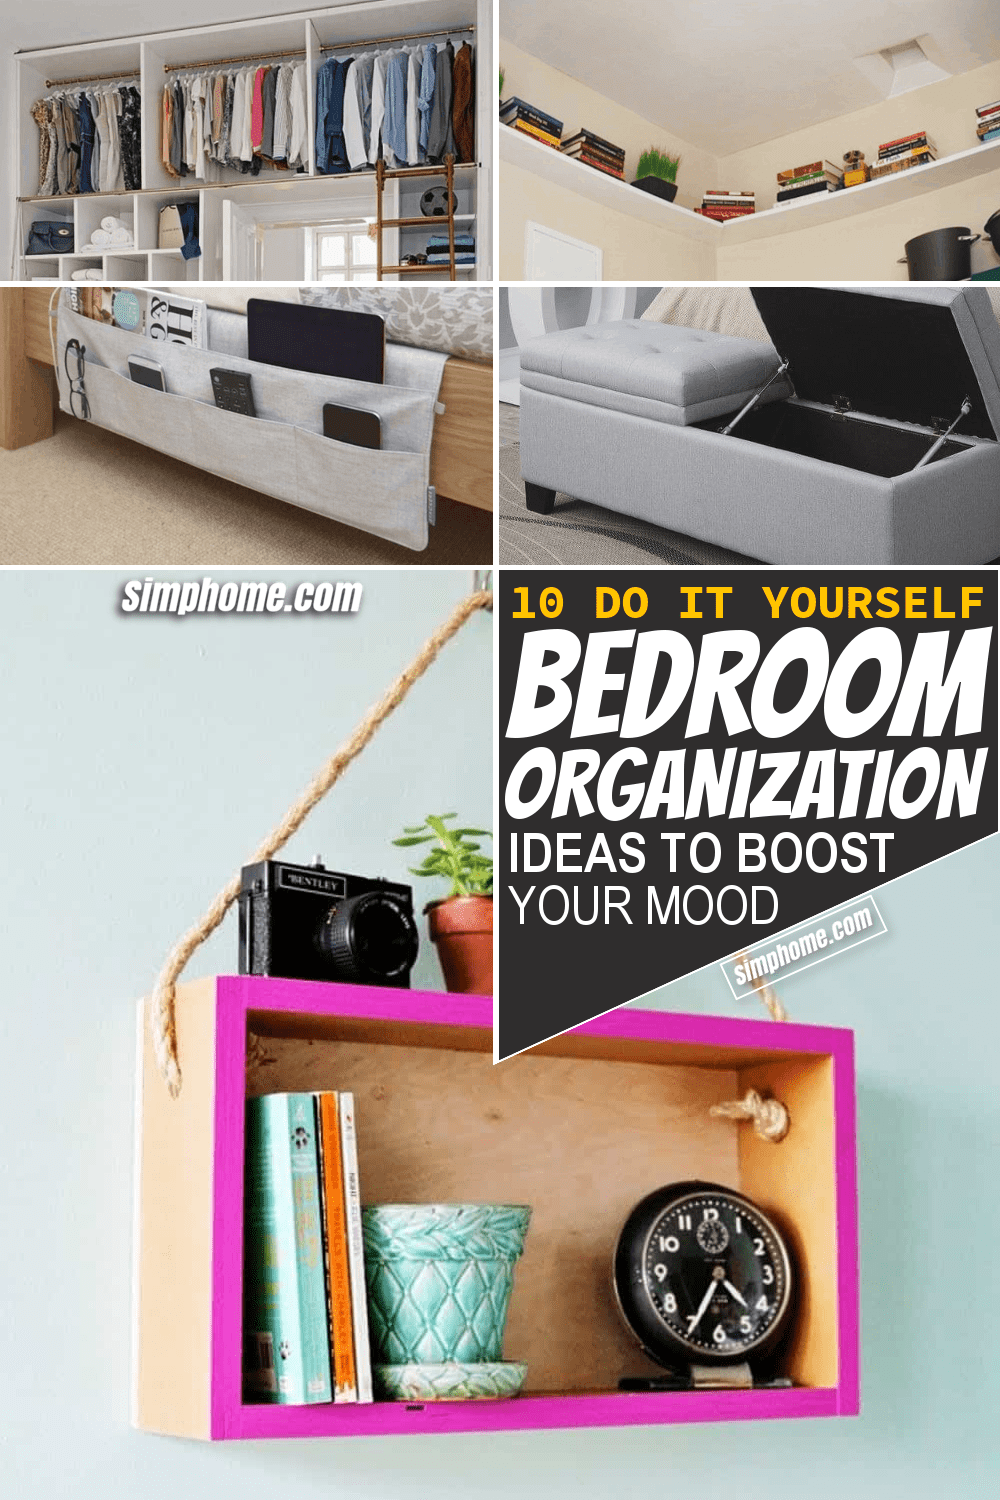 Simphome.com 10 Bedroom Organization Ideas to Boost Your Mood Featured Pinterest Image